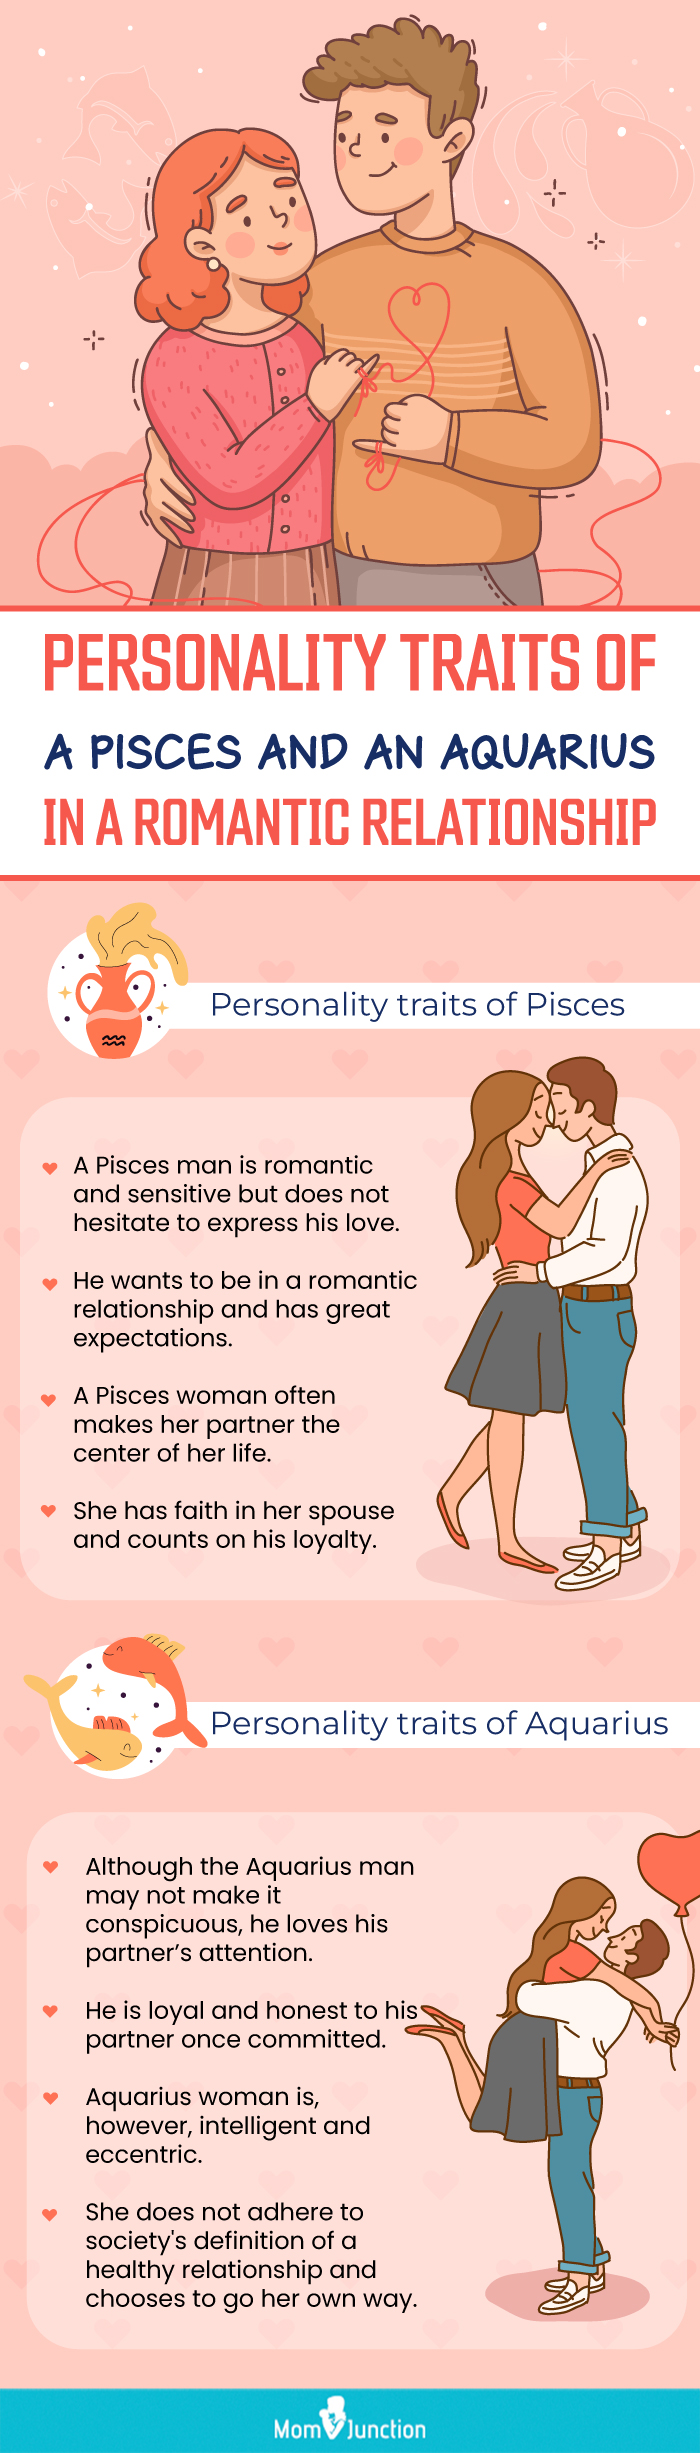 Personality Traits Of A Pisces And An Aquarius In A Romantic Relationship 